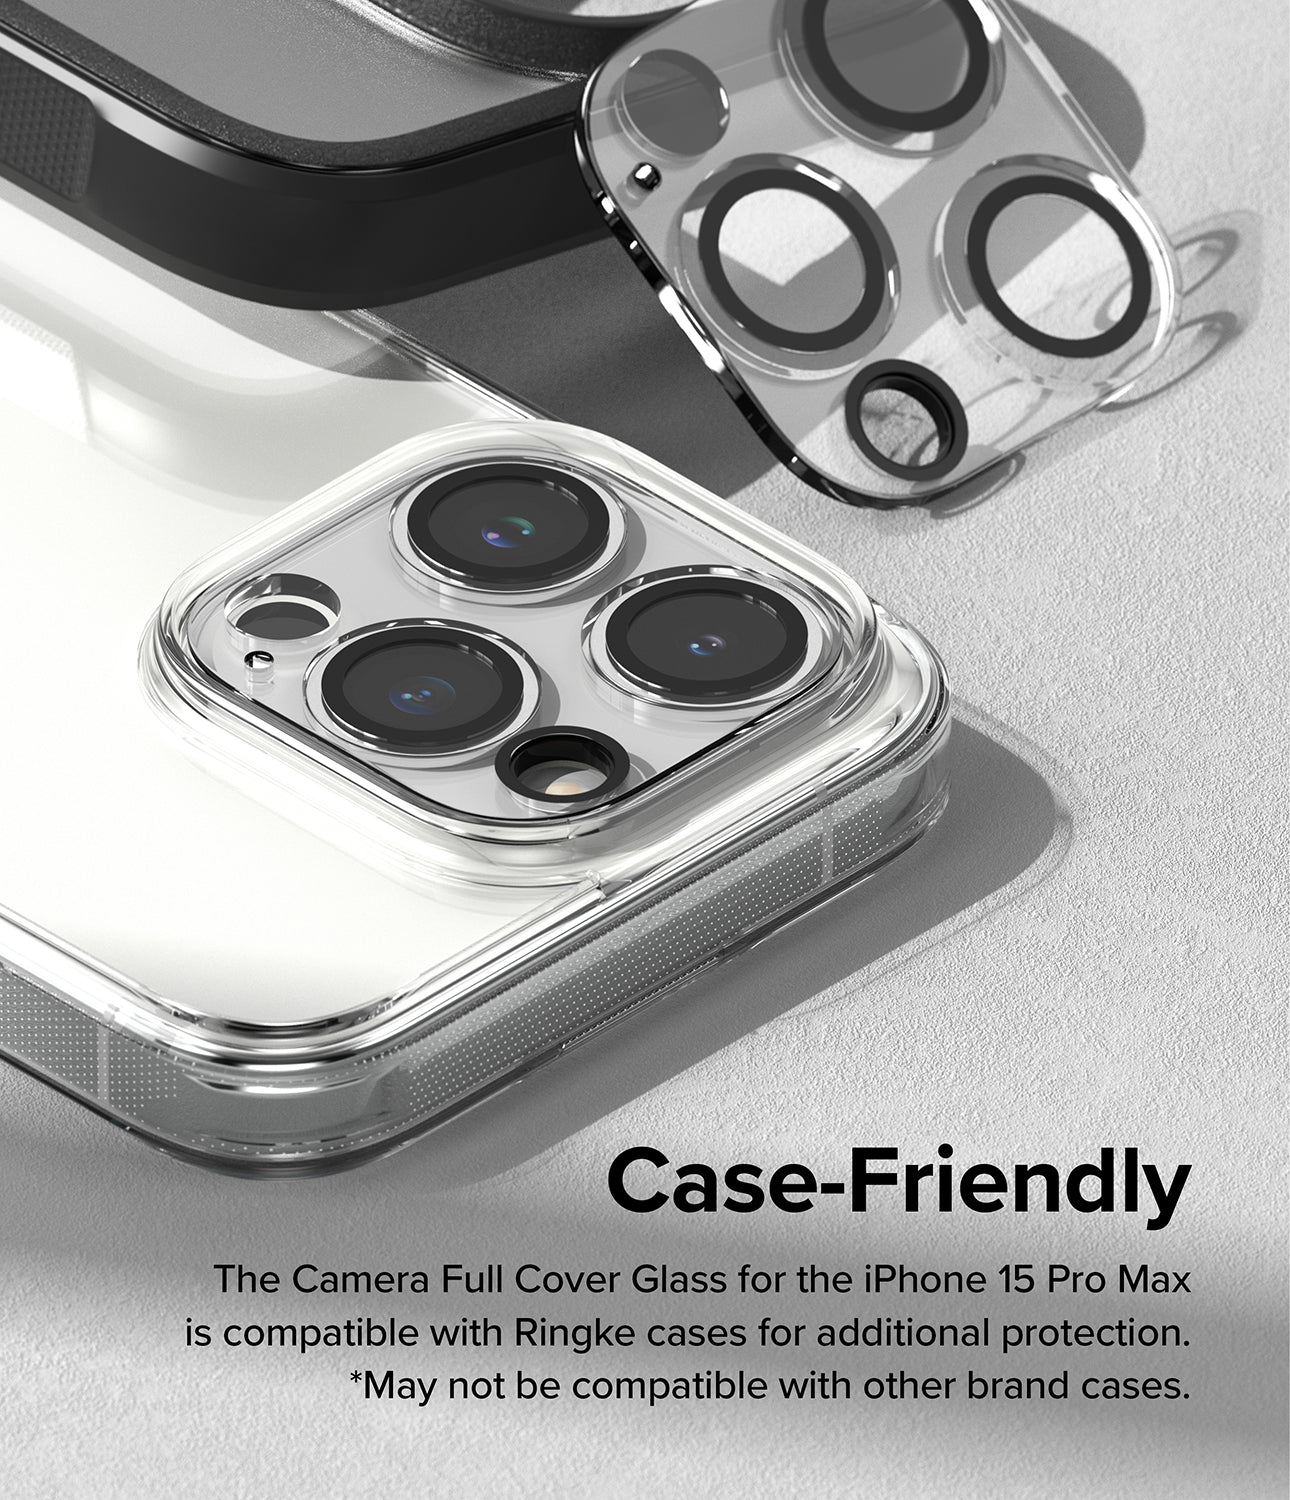 iPhone 15 Pro Max | Camera Protector Glass [2 Pack] - Case-Friendly. The Camera Full Cover Glass for the iPhone 15 Pro Max is compatible with Ringke cases for additional protection. May not be compatible with other brand cases.